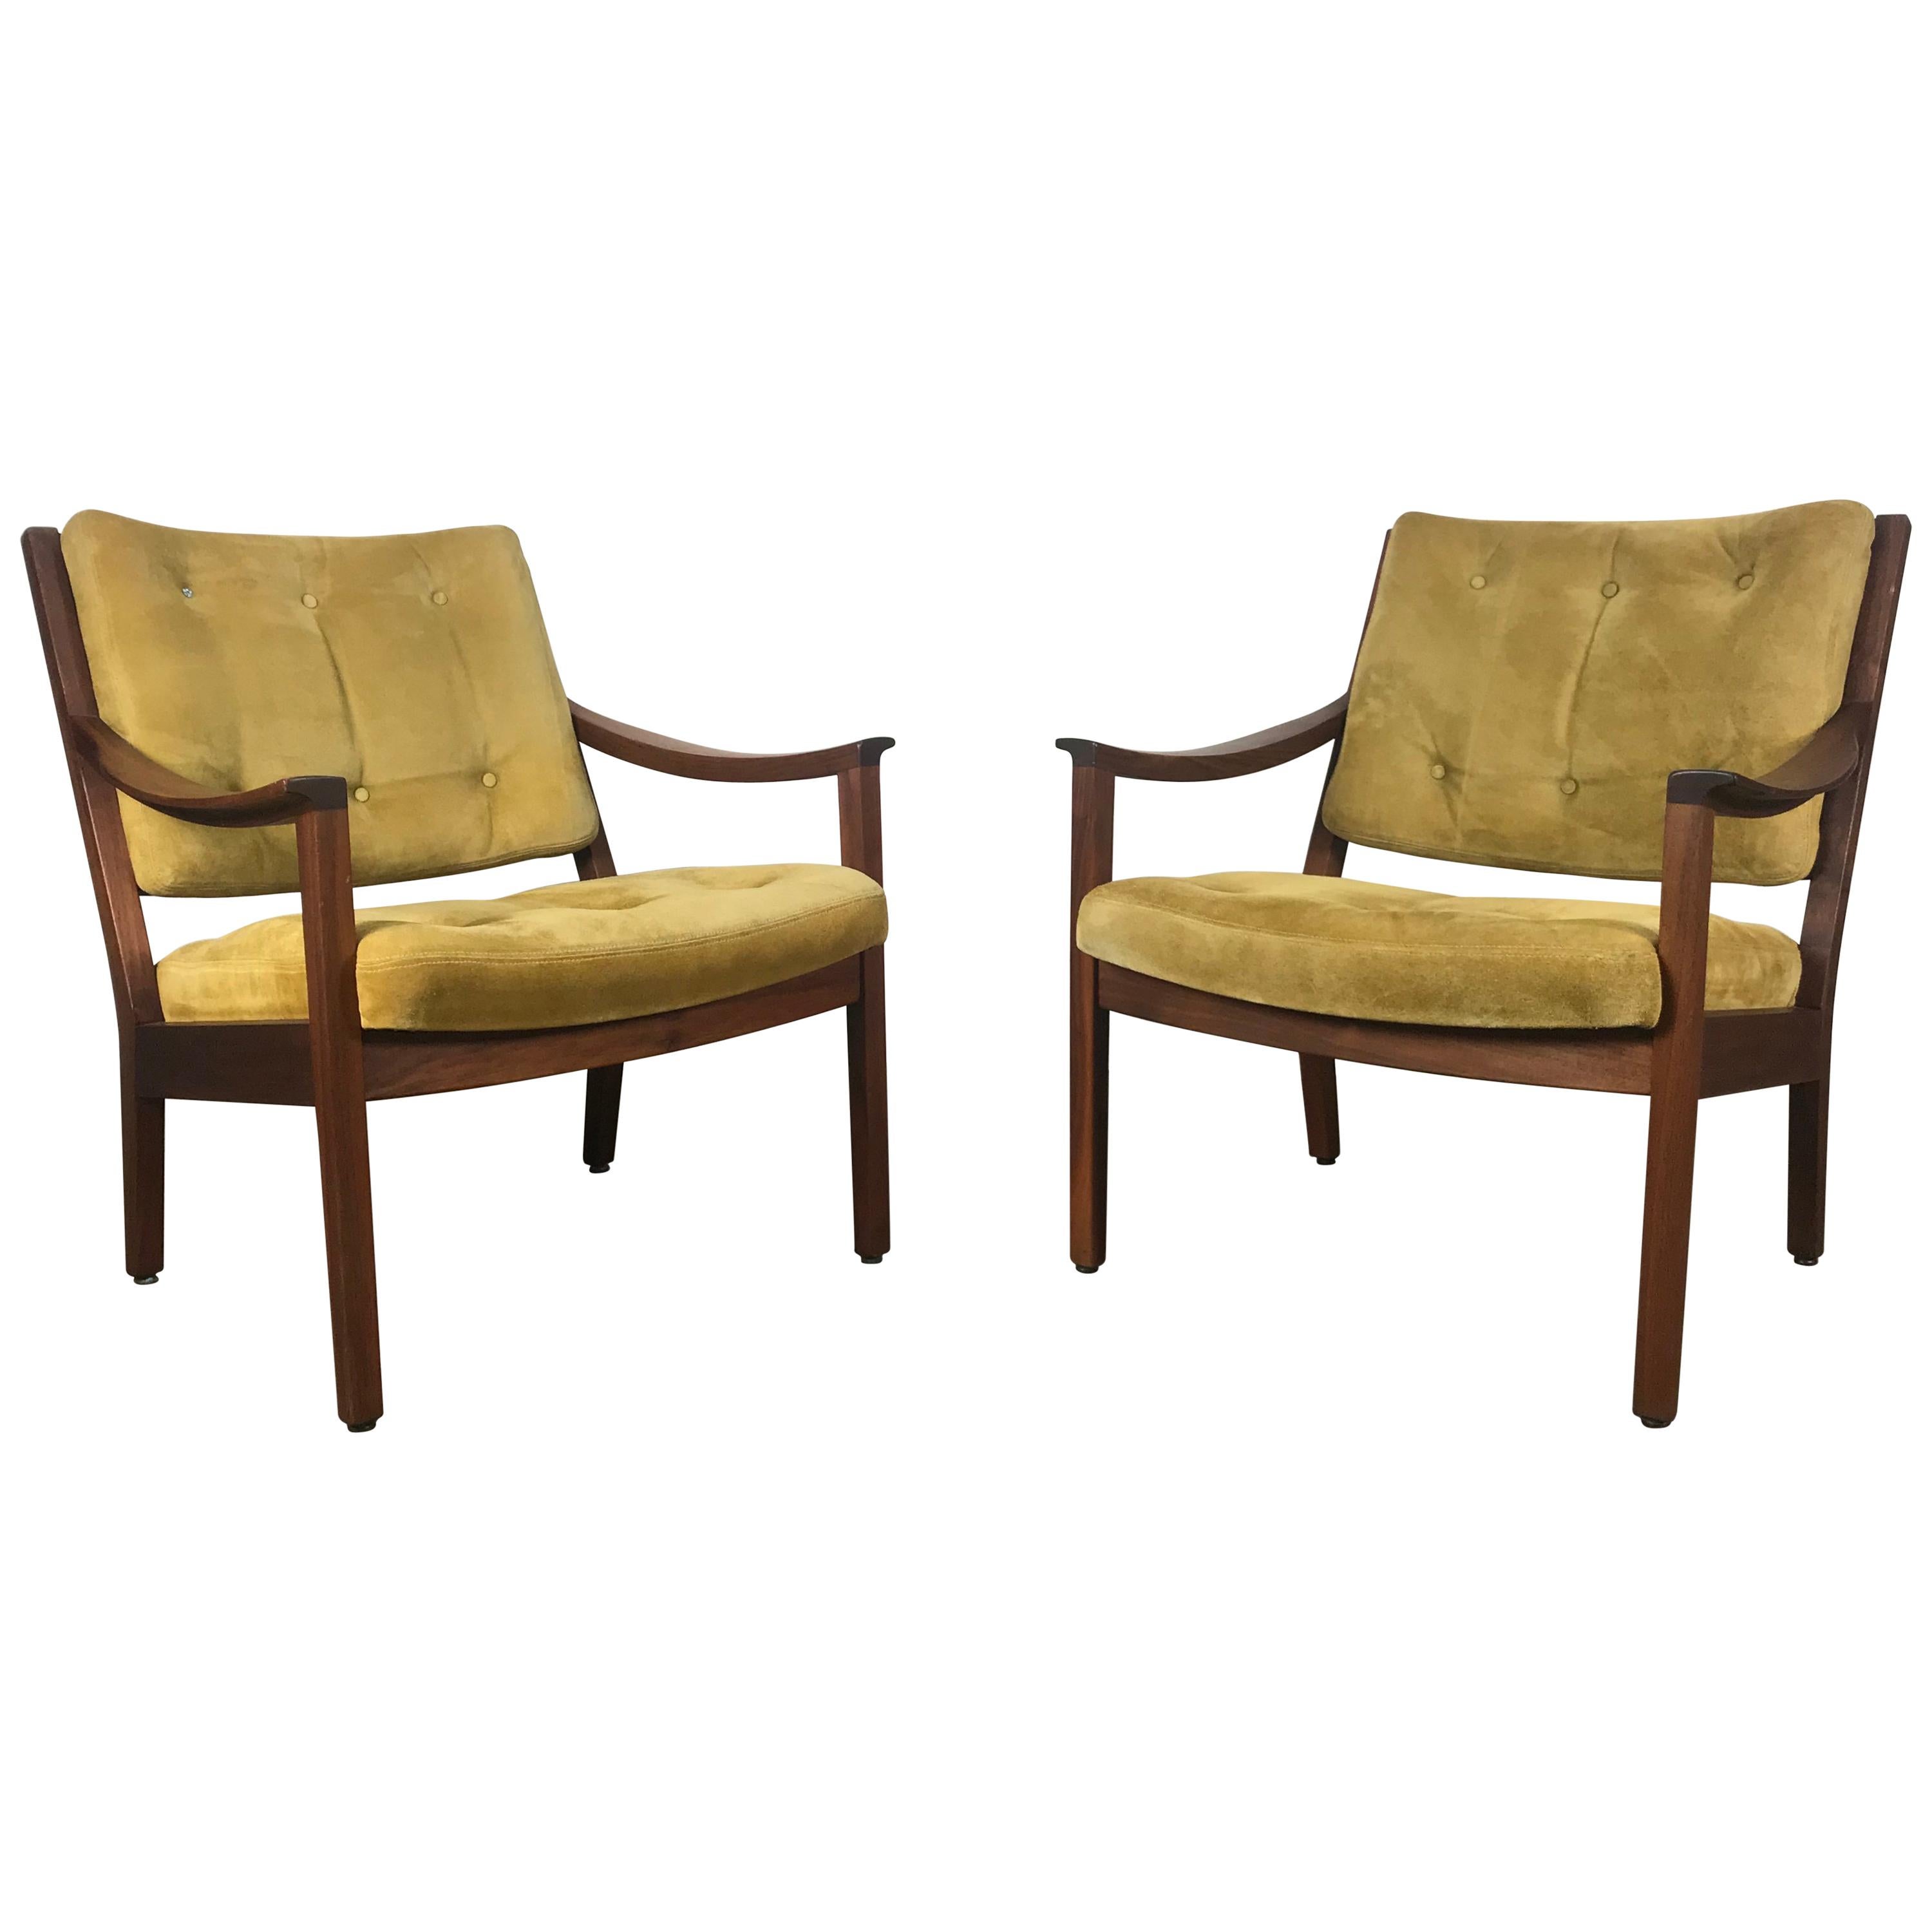 Stunning Pair Modernist Walnut and Suede Lounge Chairs by Gunlocke